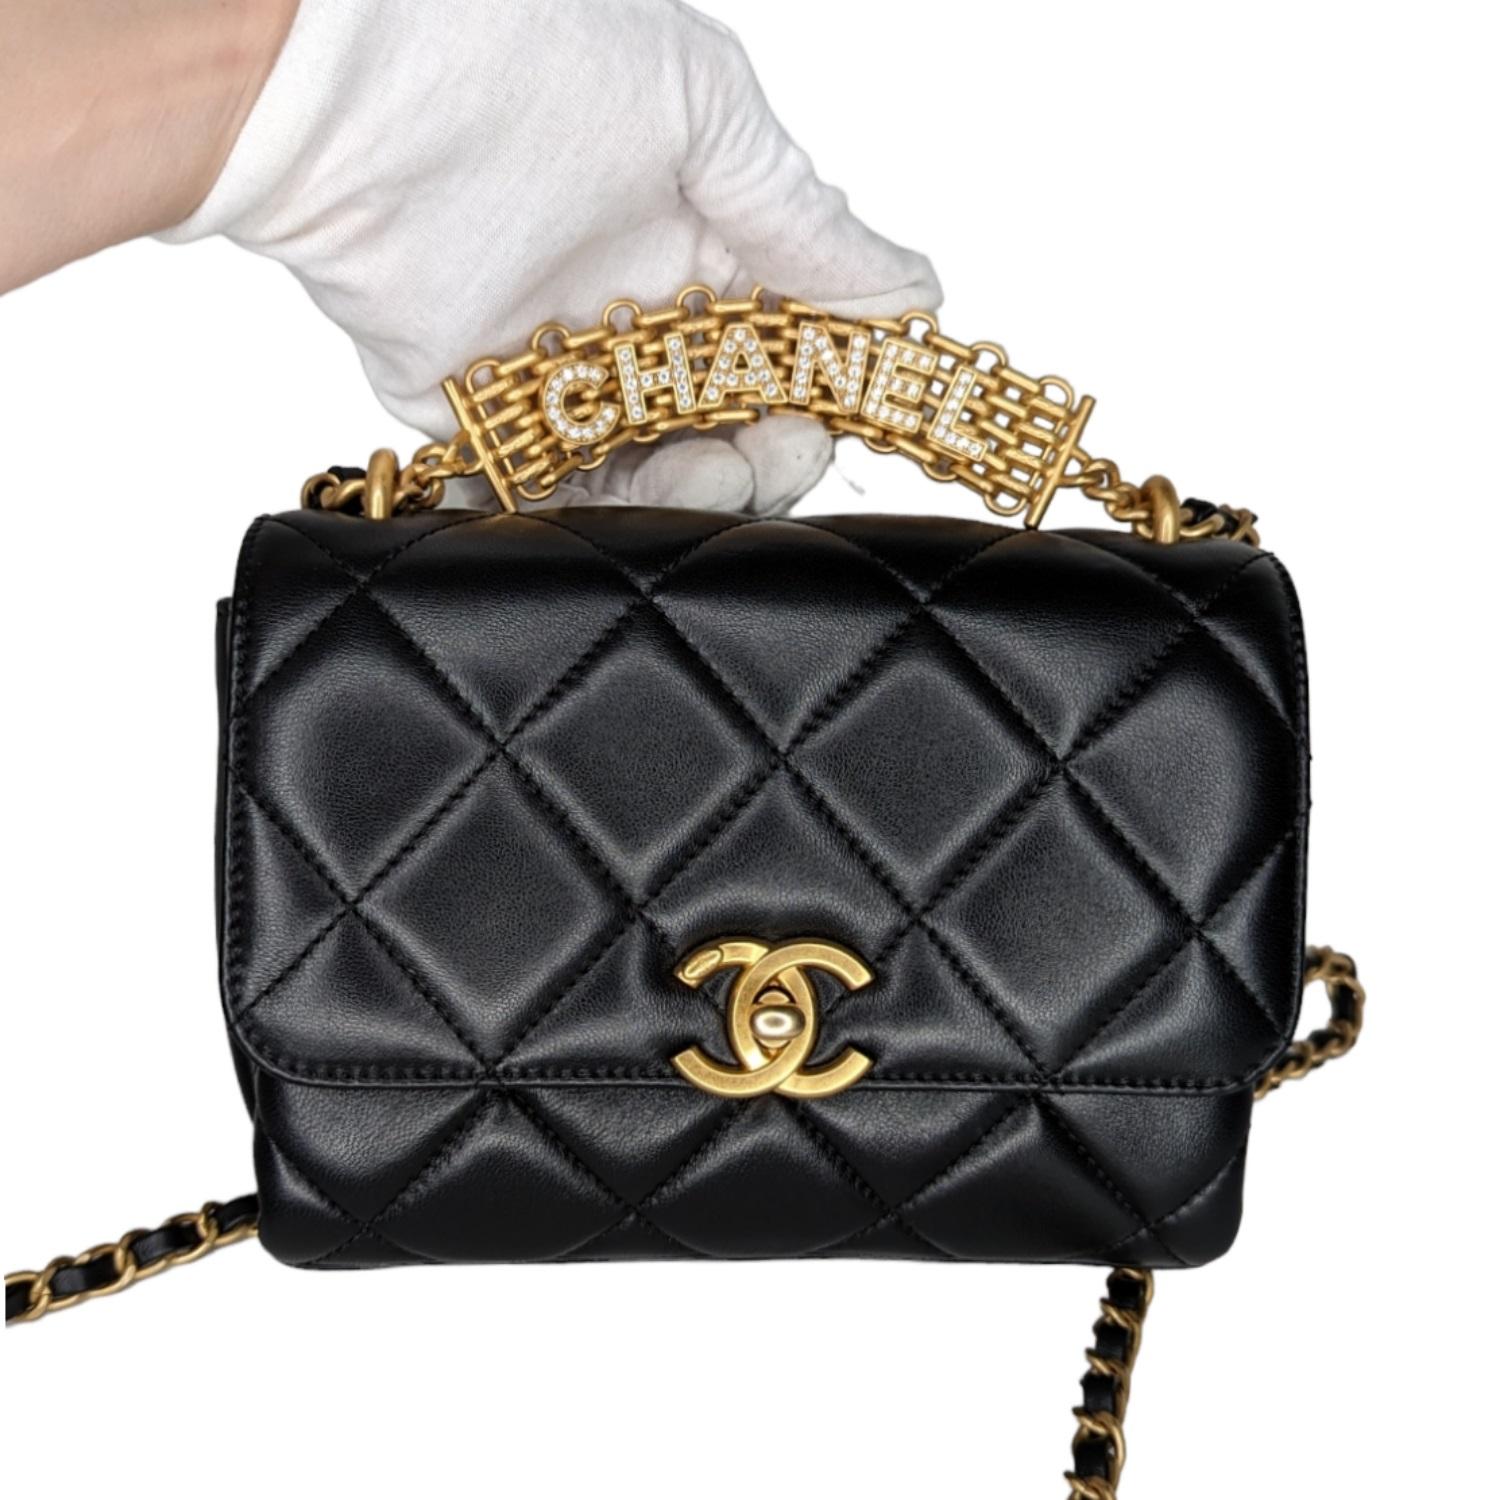 From the Spring/Summer 2022 Collection by Virginie Viard. This shoulder bag is crafted of lambskin leather in black. The bag features a gold reissue top handle with a crystal encrusted Chanel logo, a leather threaded aged gold chain shoulder strap,